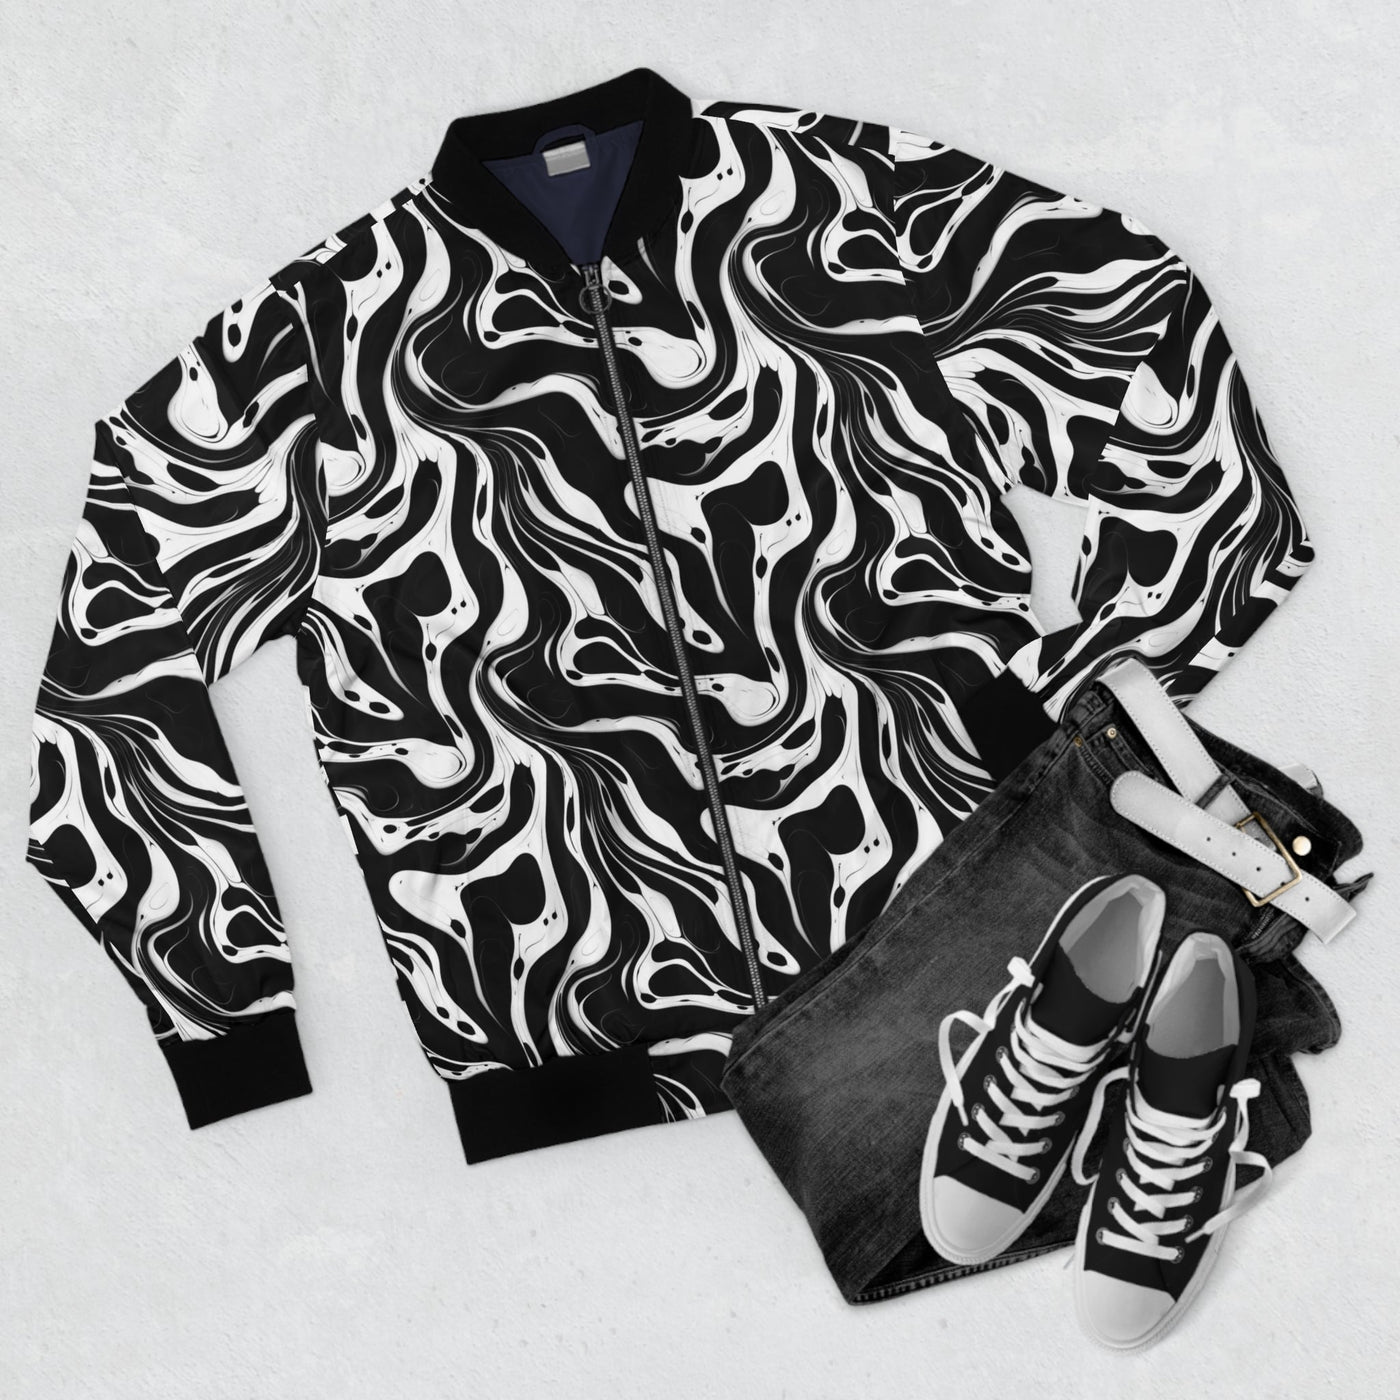 Wavy Distorted Black and White Ink Pattern Lightweight Bomber Jacket